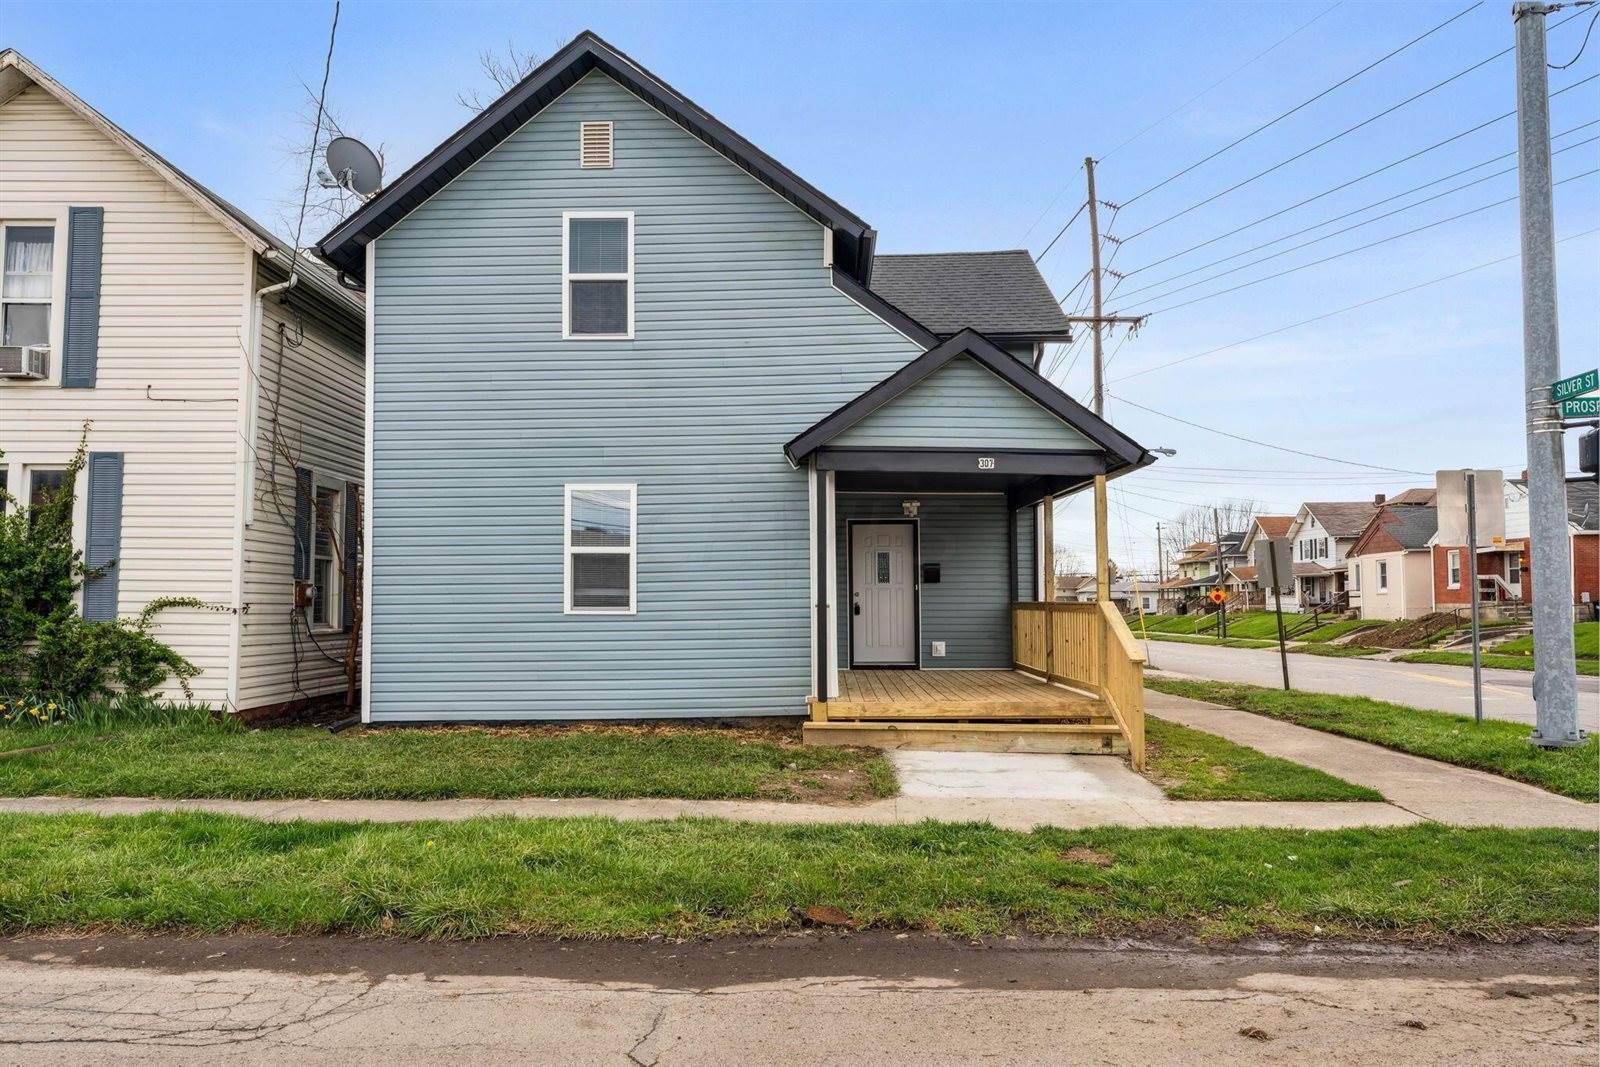 307 North Prospect Street, Marion, OH 43302